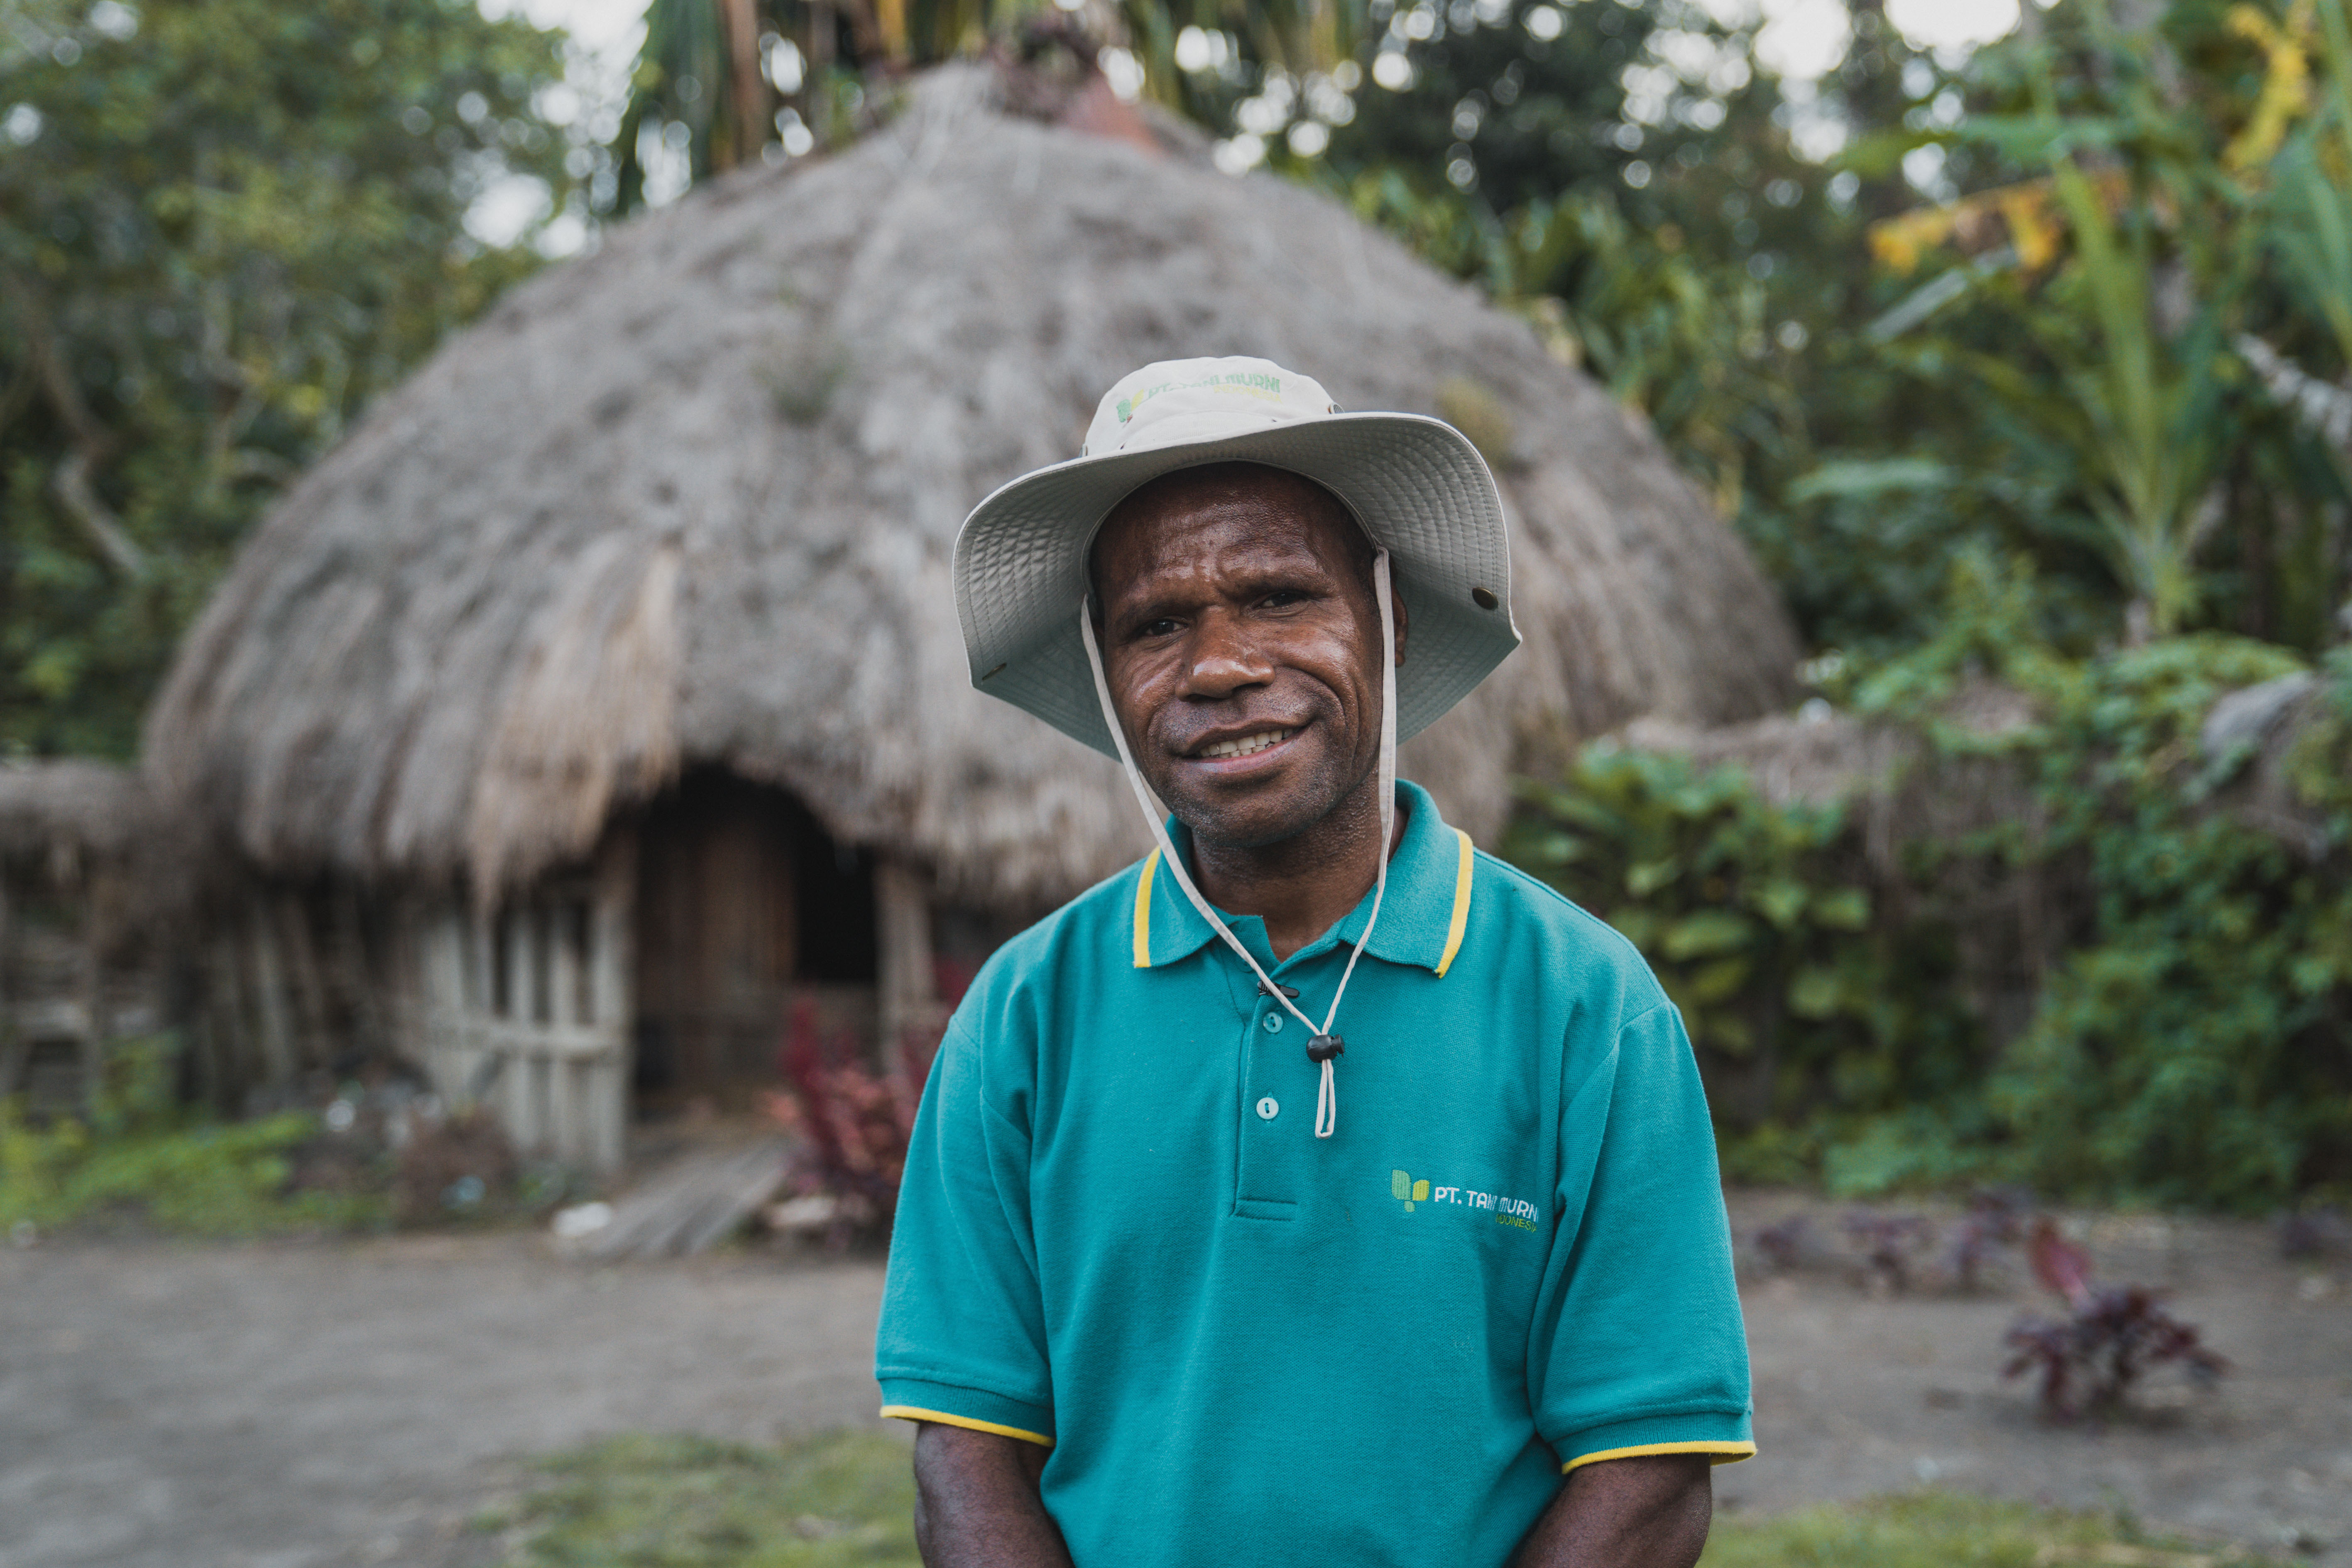 Meet Yulian Kogoya, a field agent for seed producer and PRISMA partner, PT Tani Murni.